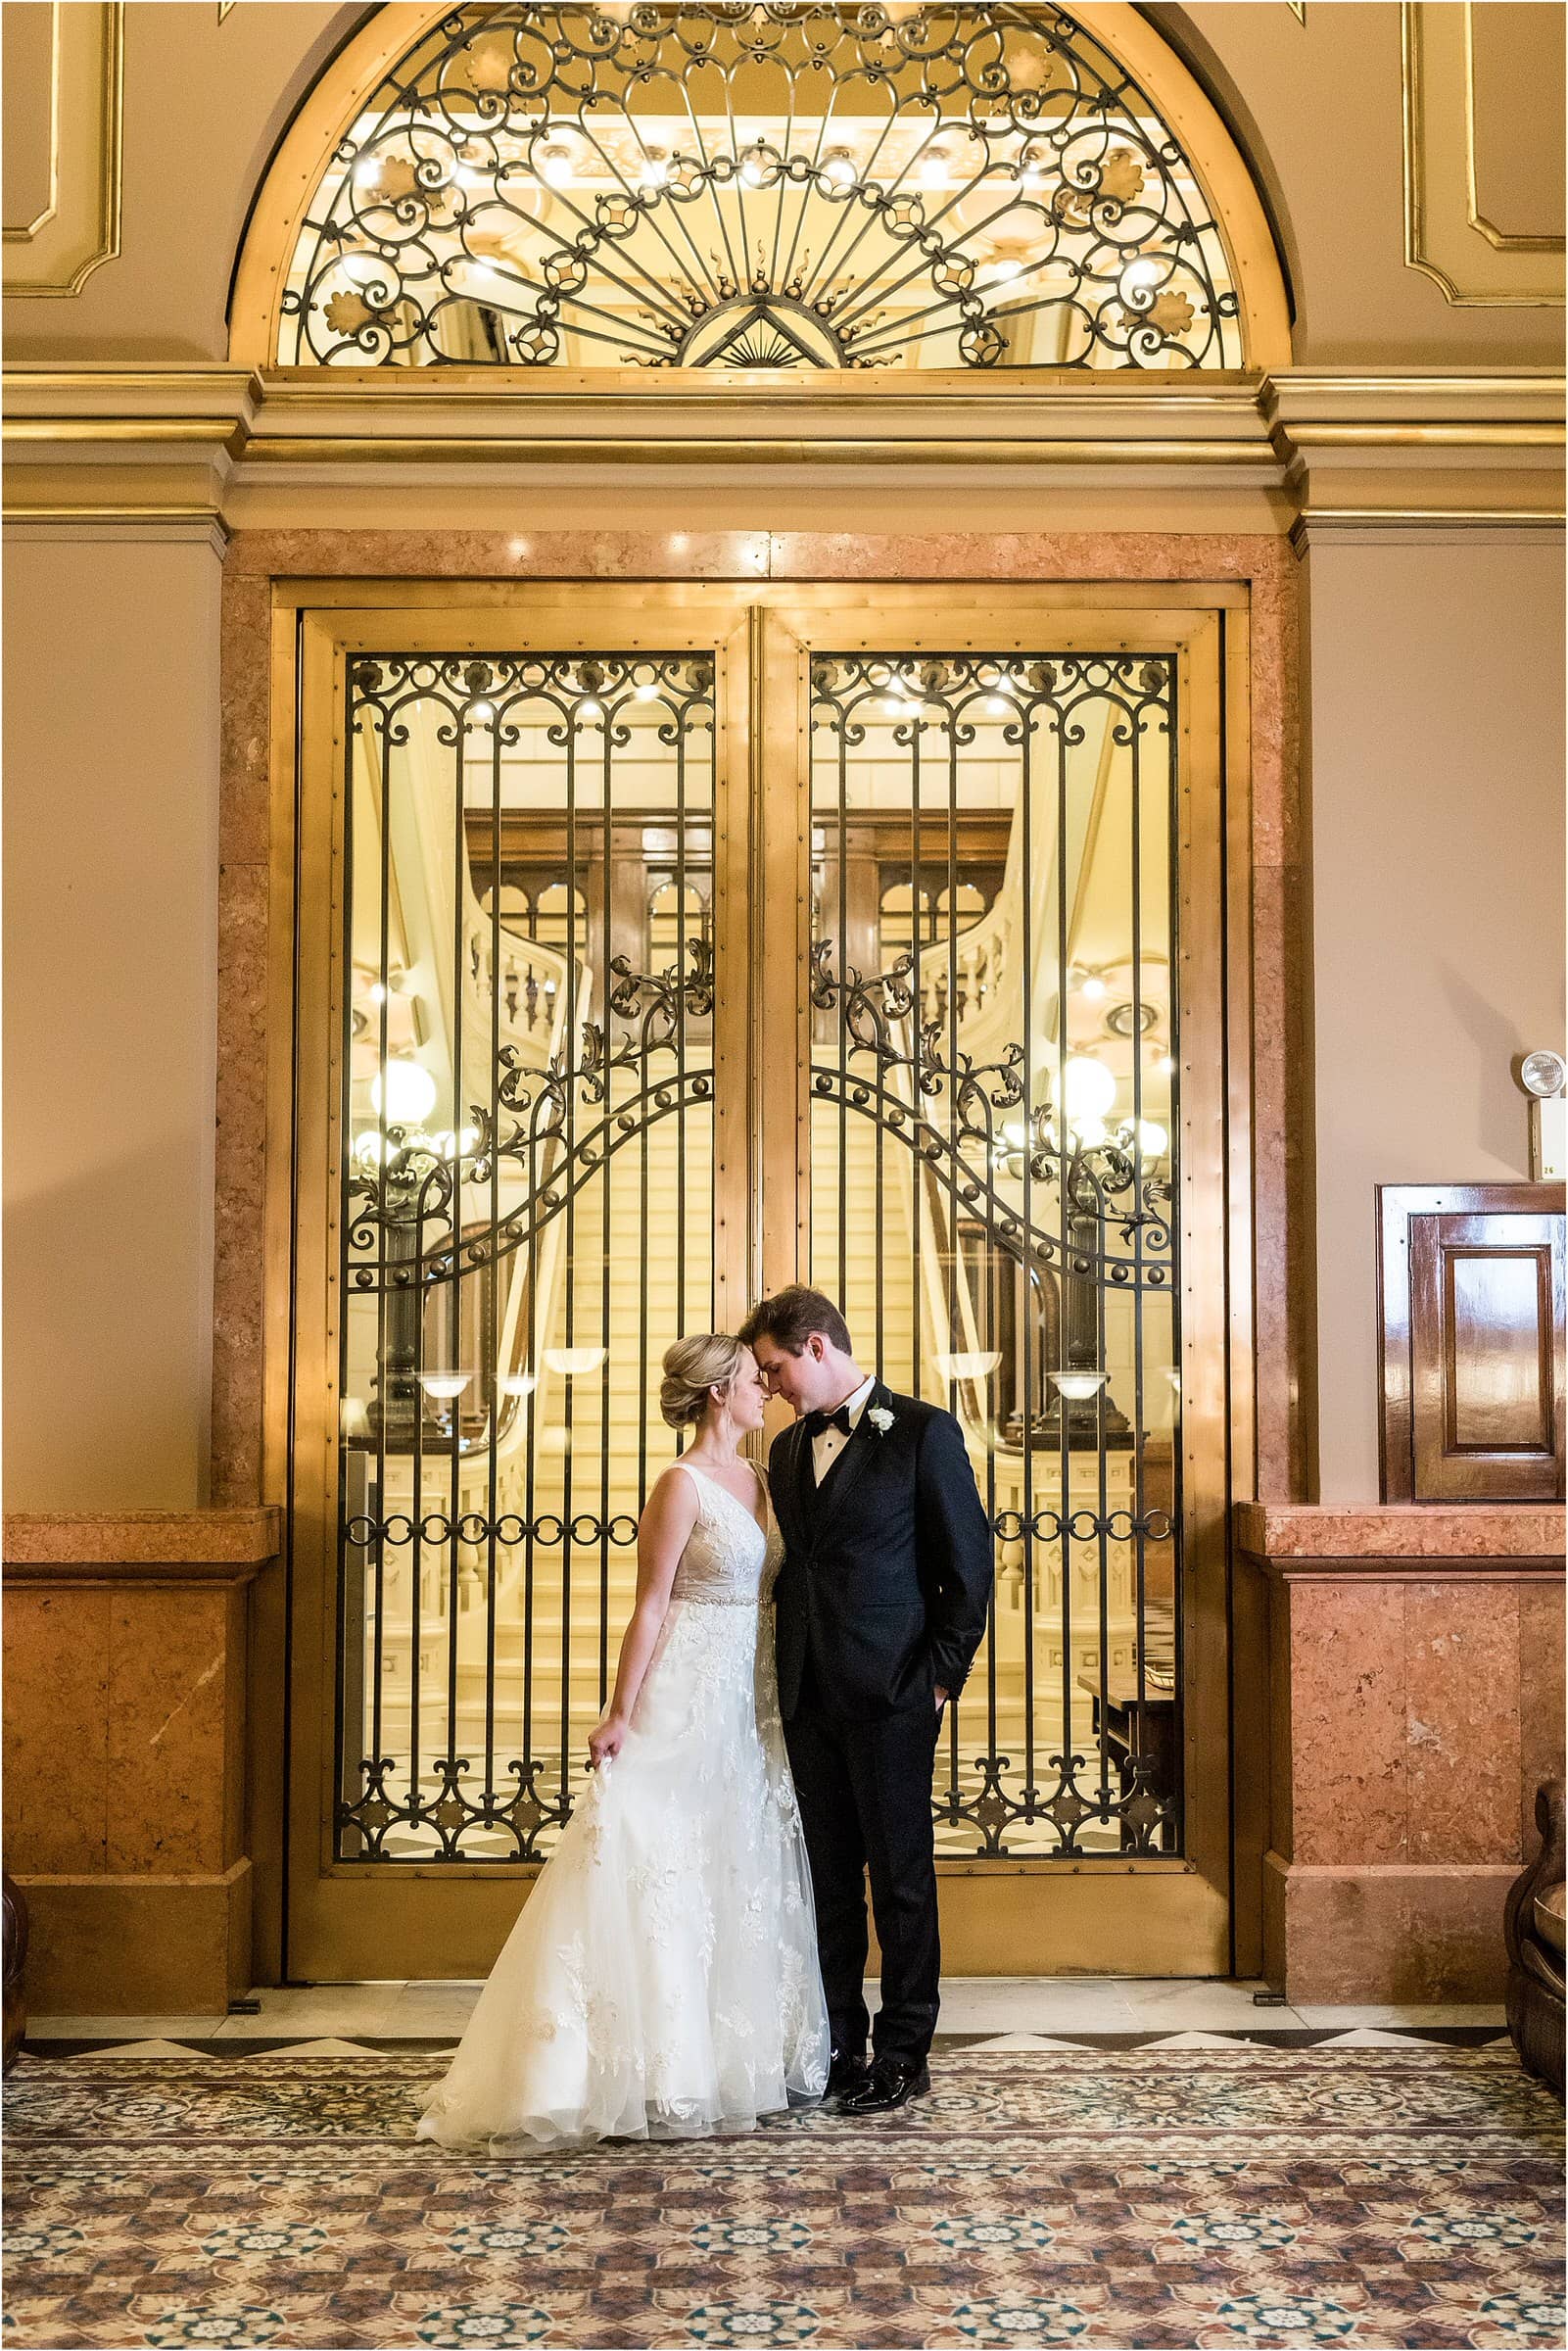 The bride and groom touching foreheads and leaning in close up against a gold doorway